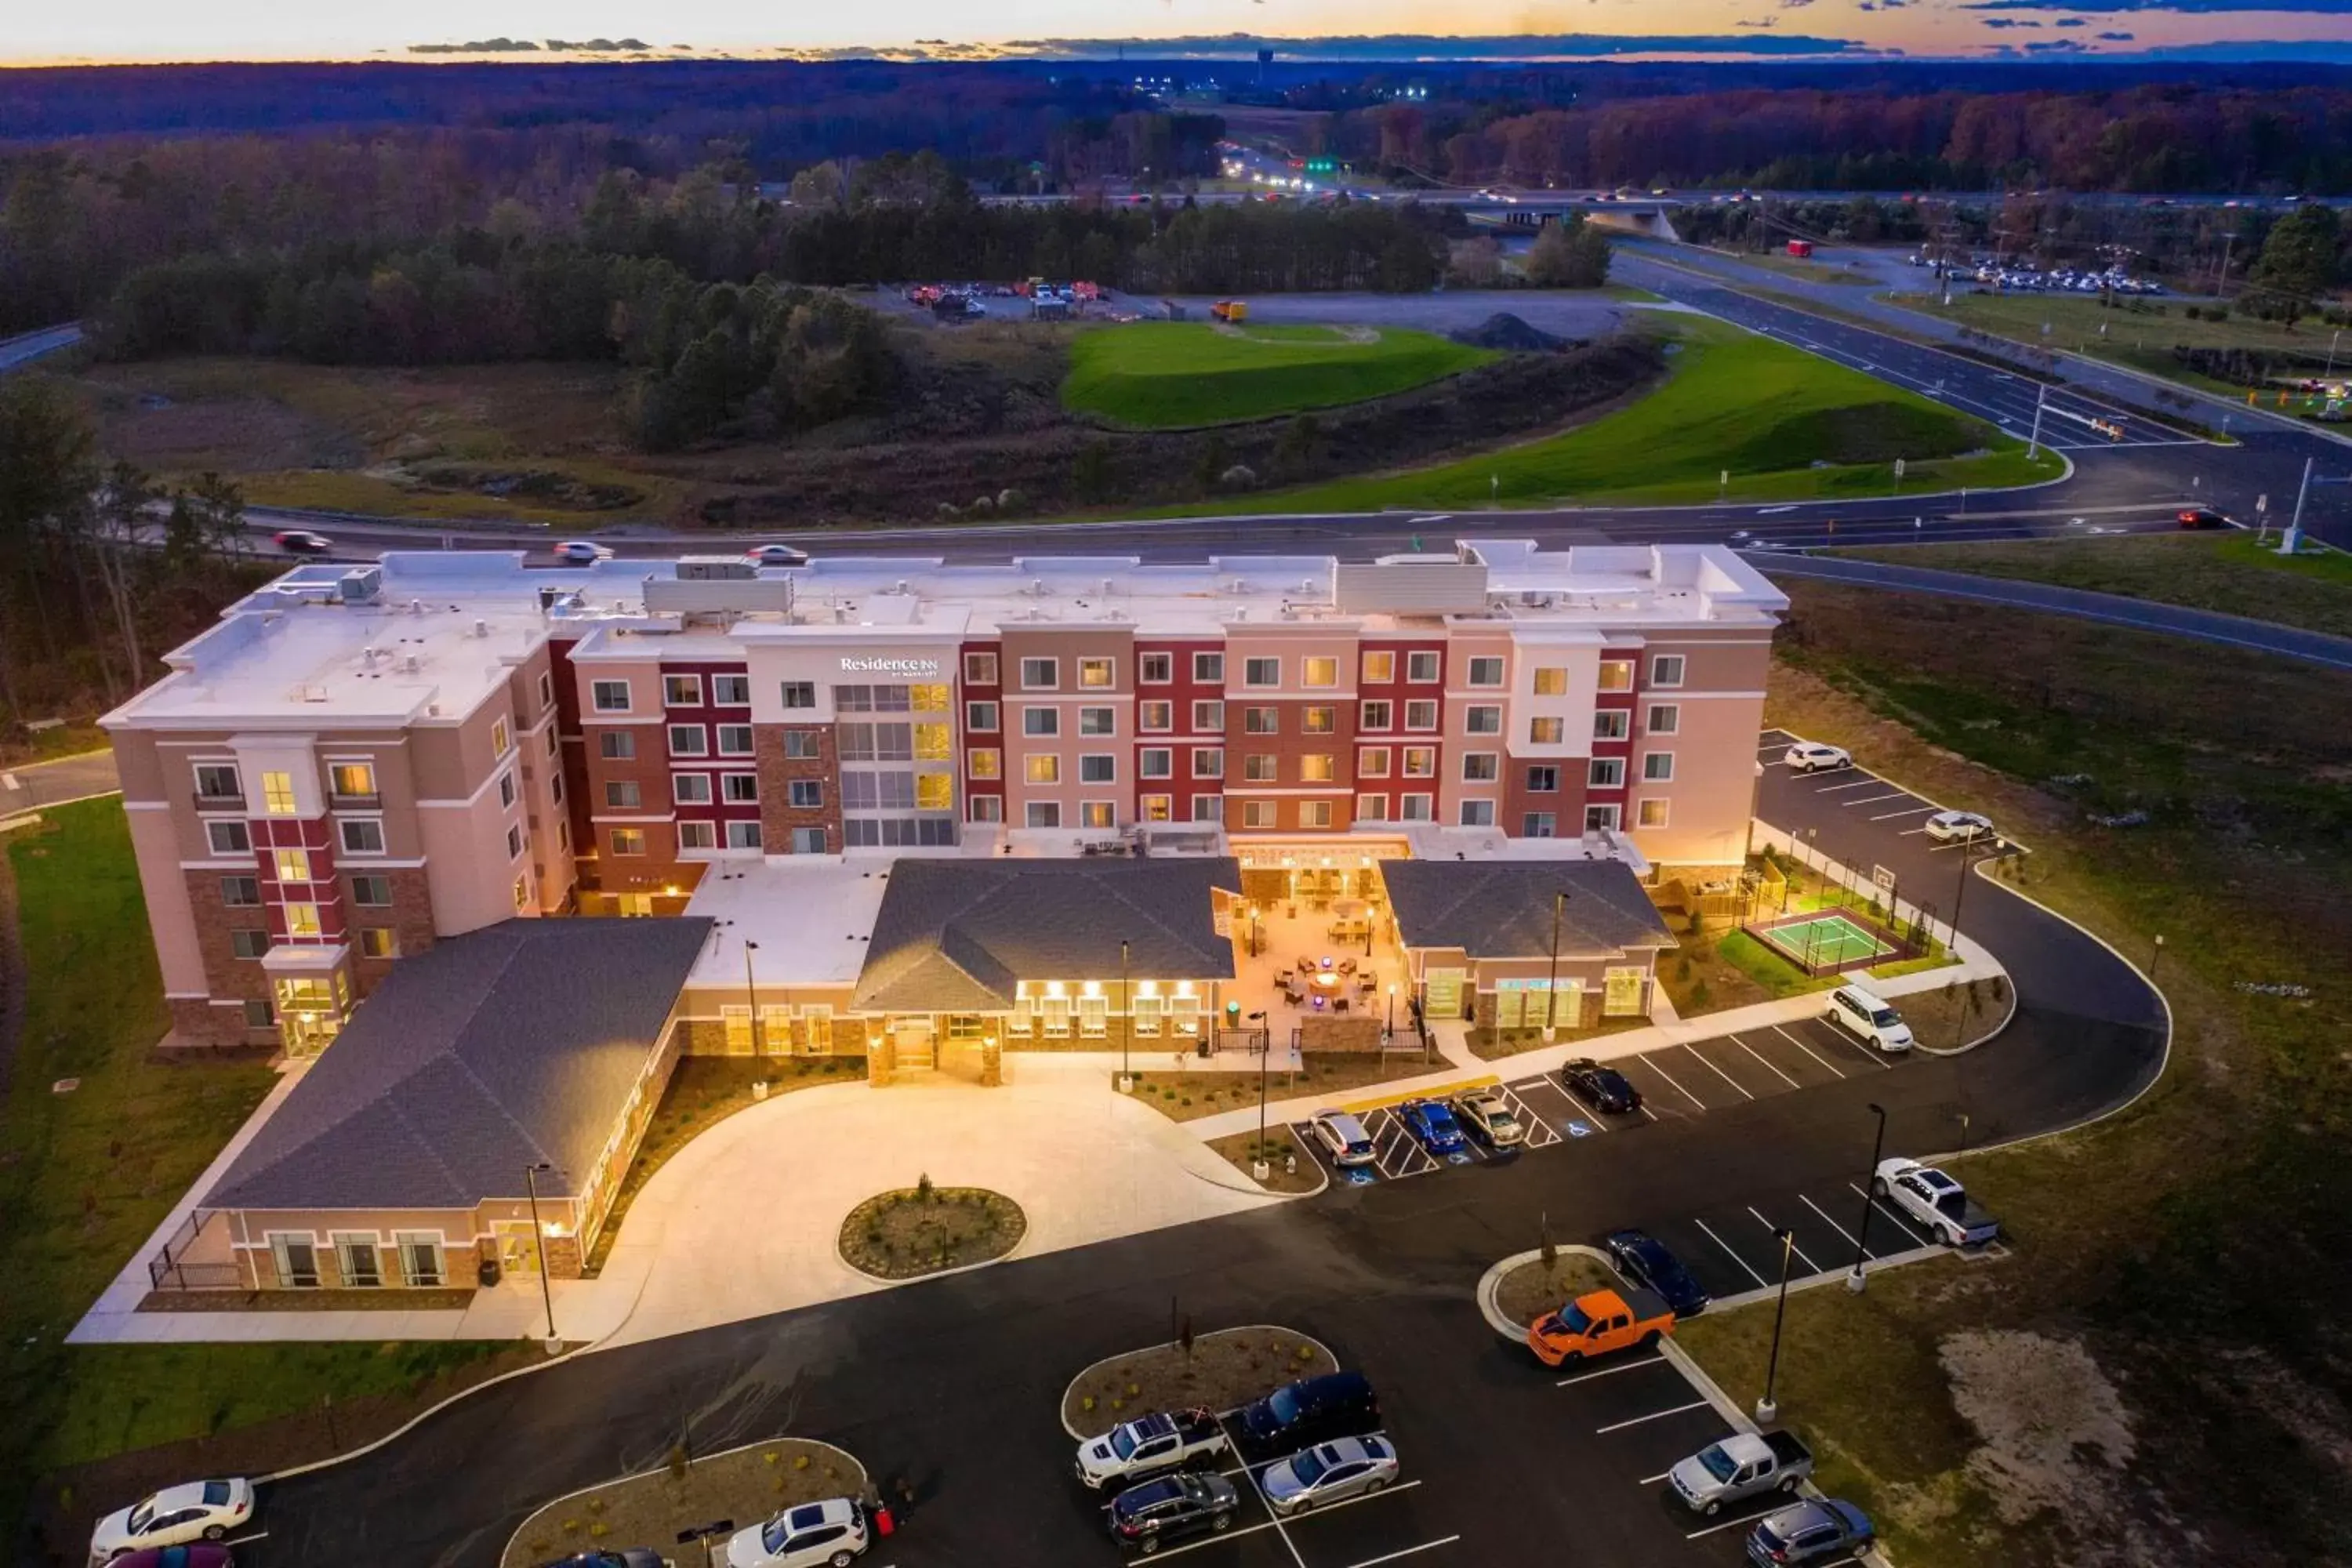 Property building, Bird's-eye View in Residence Inn by Marriott Richmond at the Notch